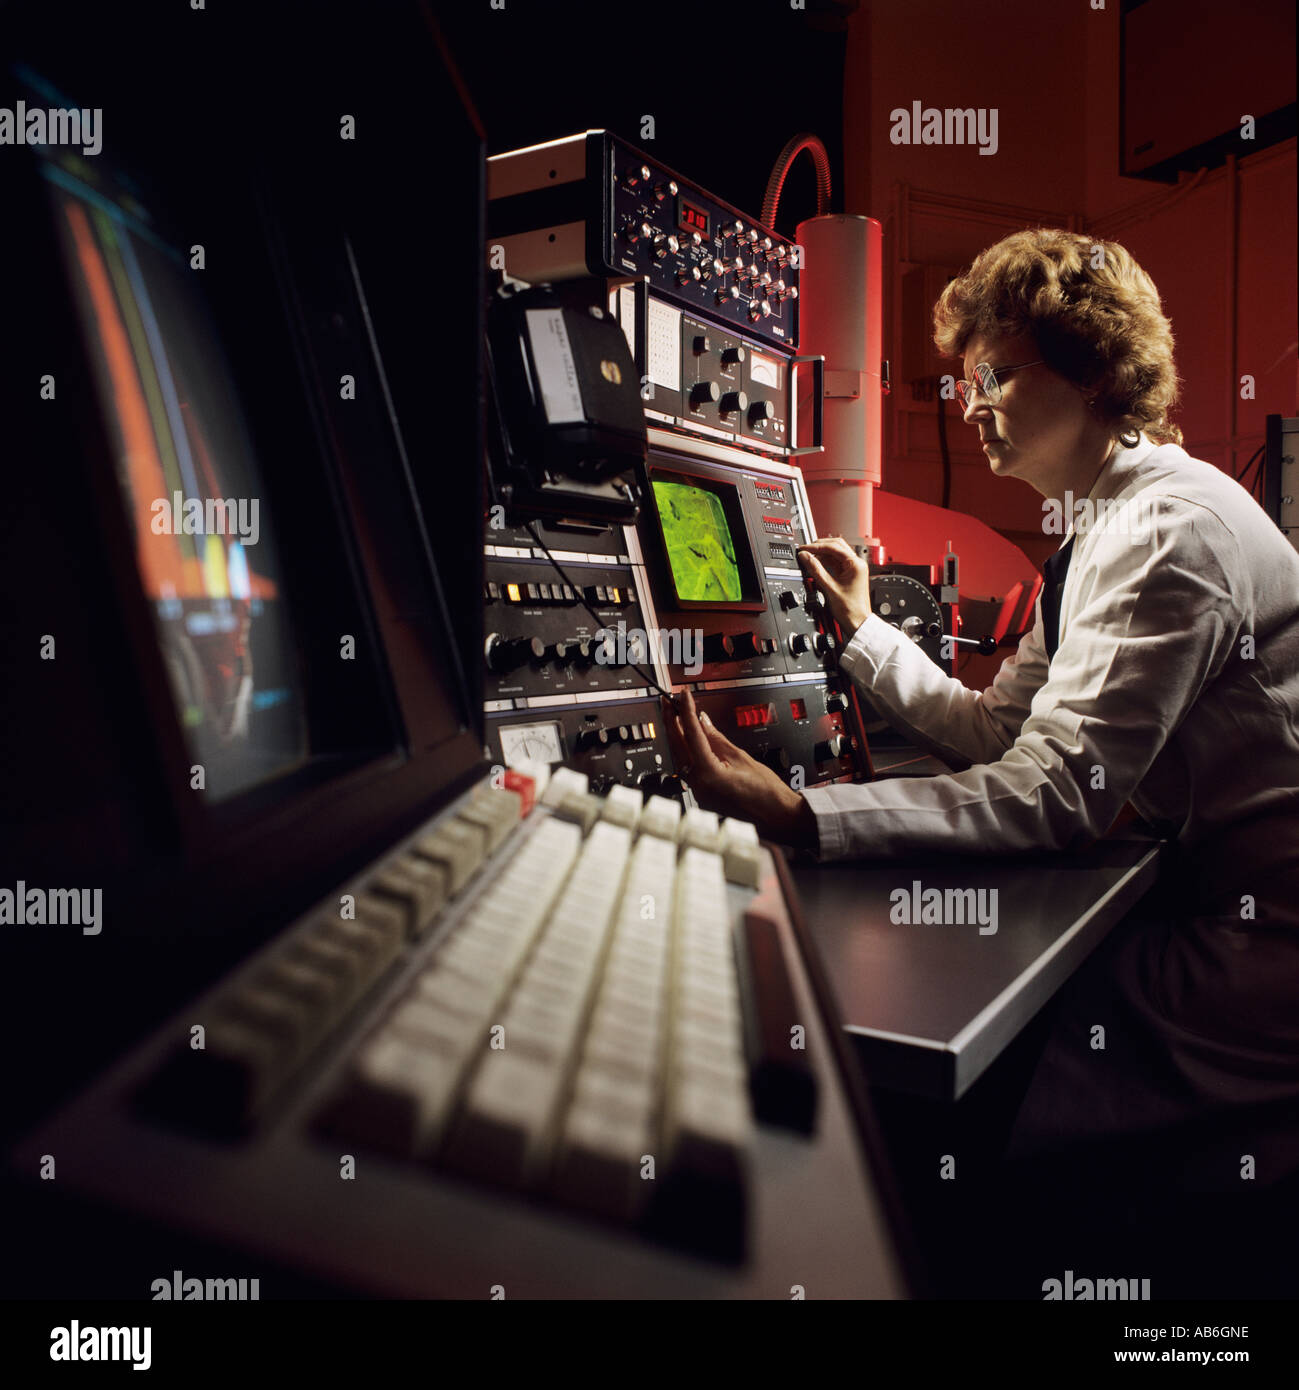 Woman scientist operating electron microscope in UK research laboratory Stock Photo